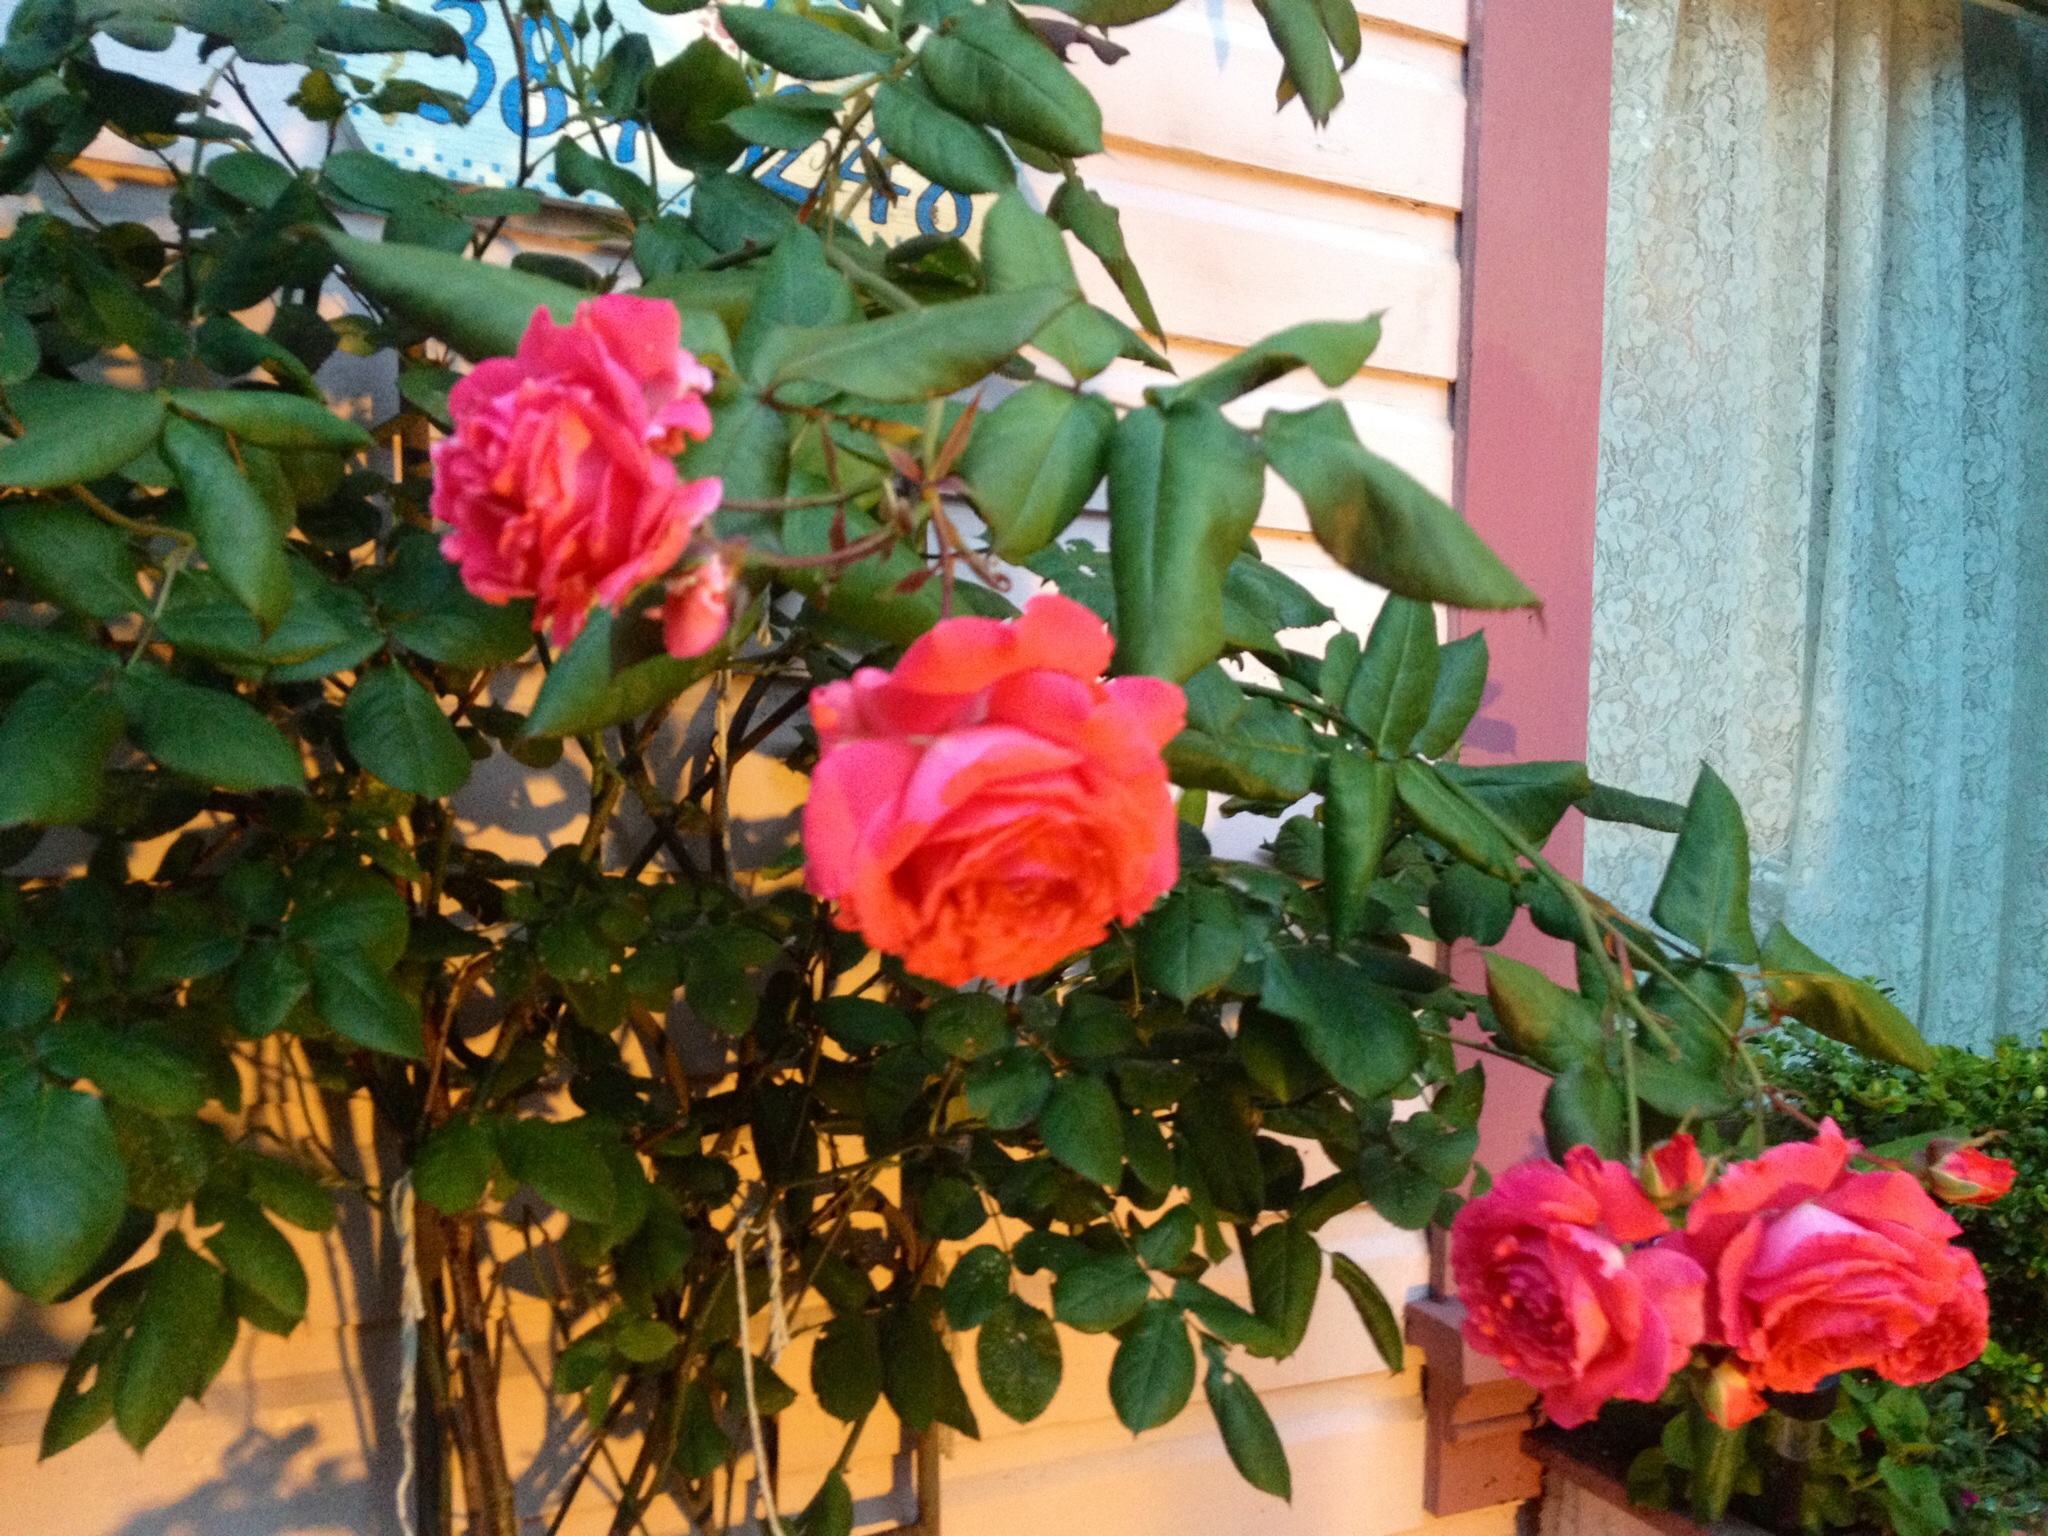 Roses at the Gingerbread Cottage